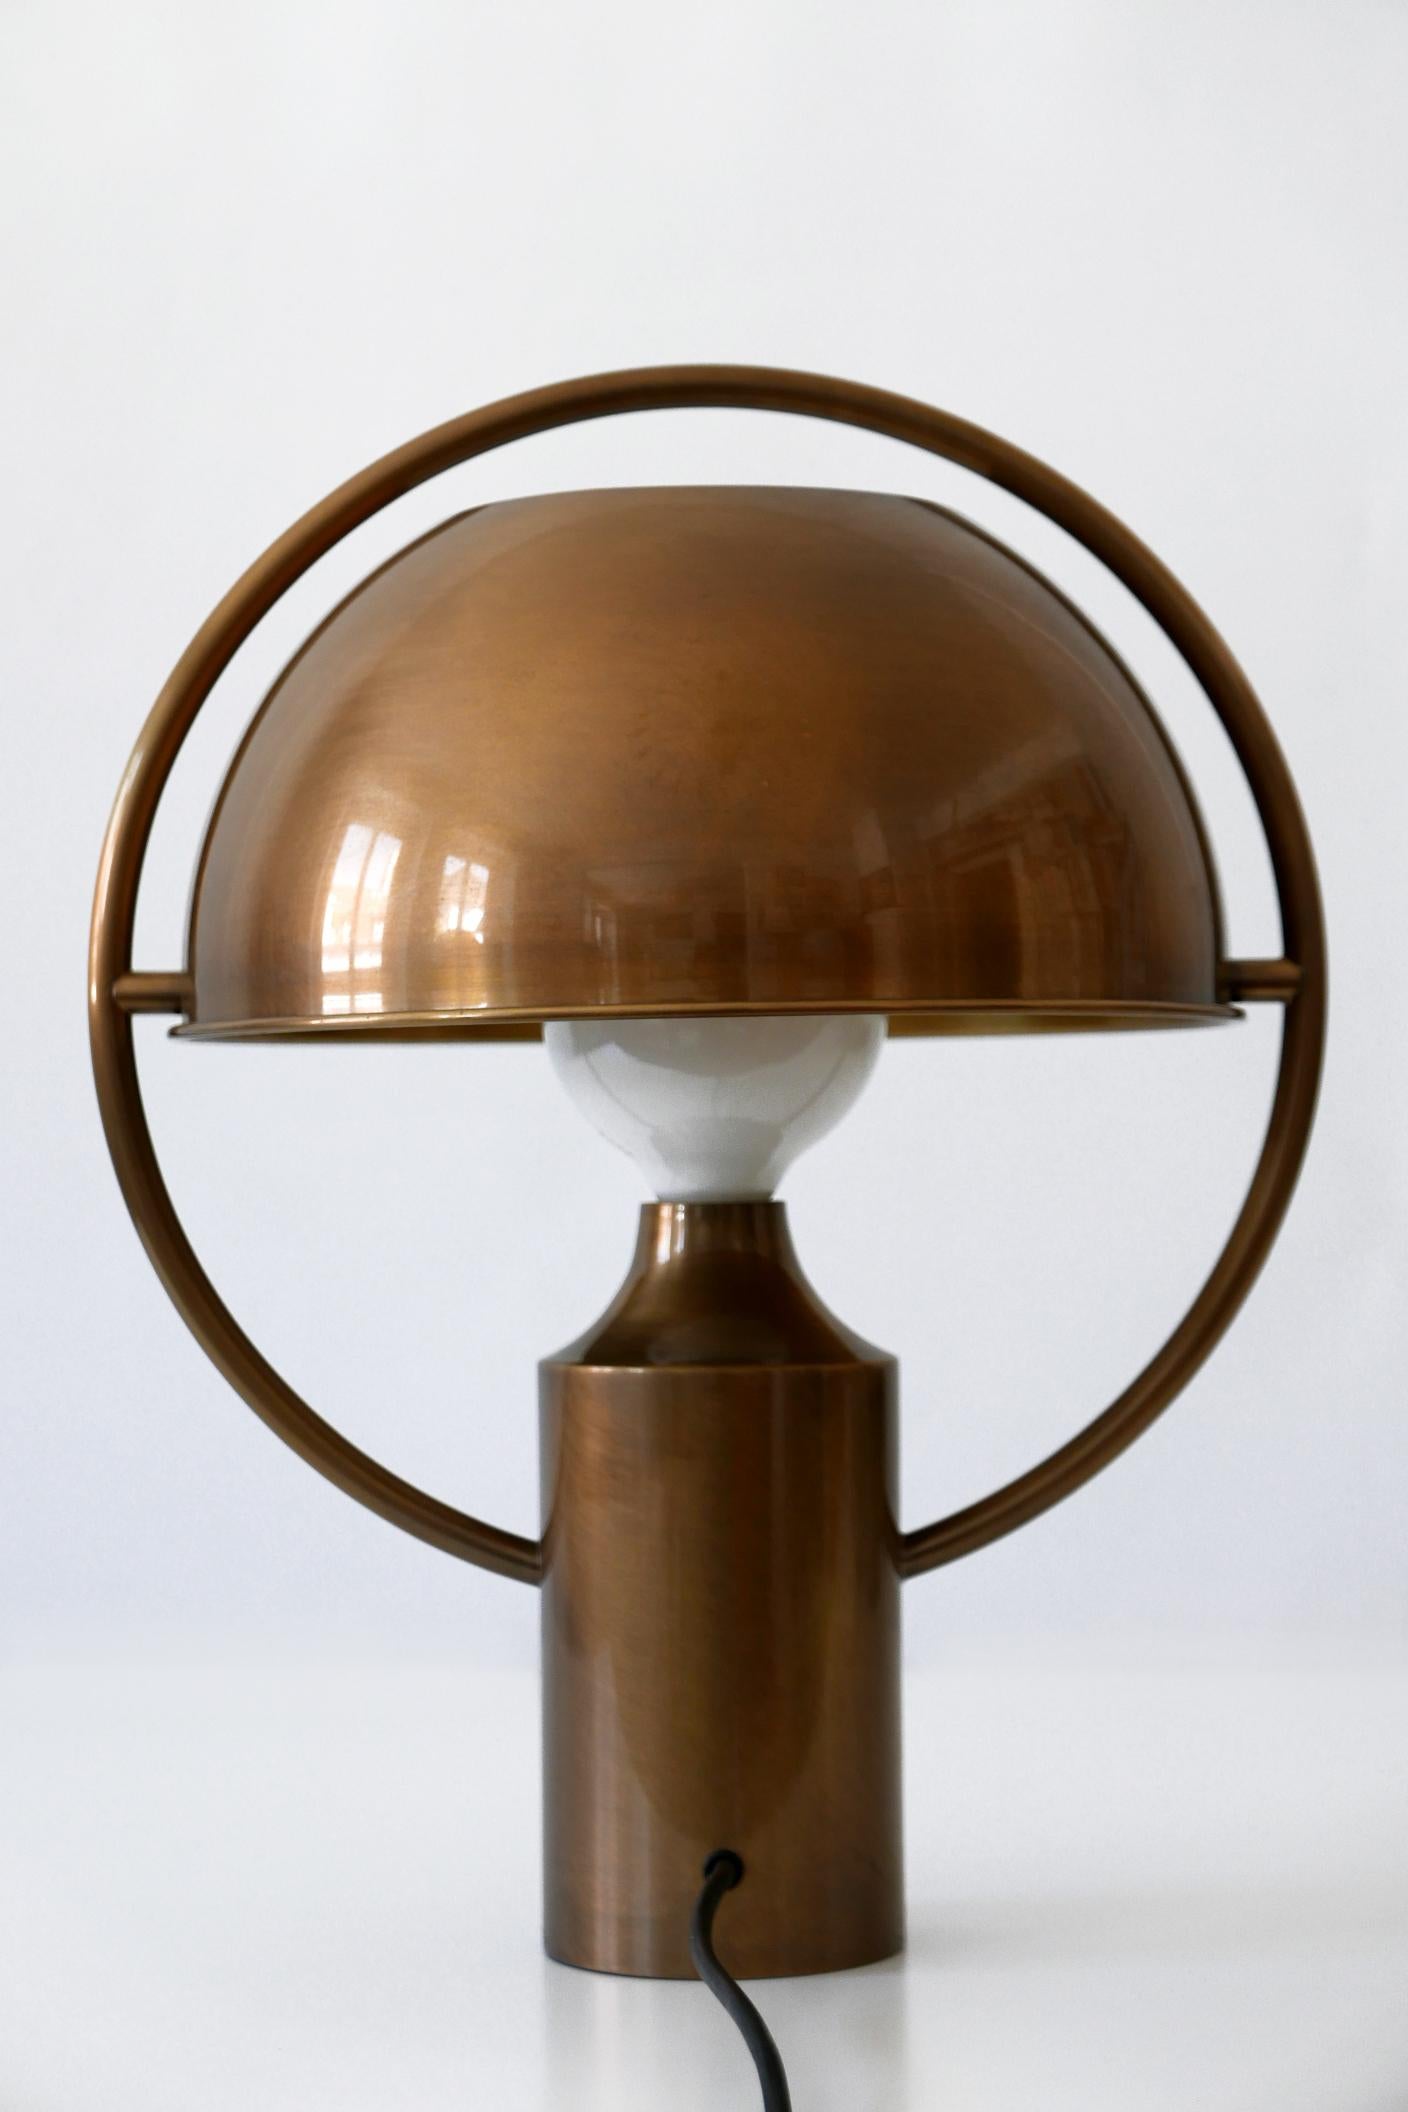 Extremely Rare Mid-Century Modern Table Lamp by Florian Schulz Germany 1970s For Sale 2